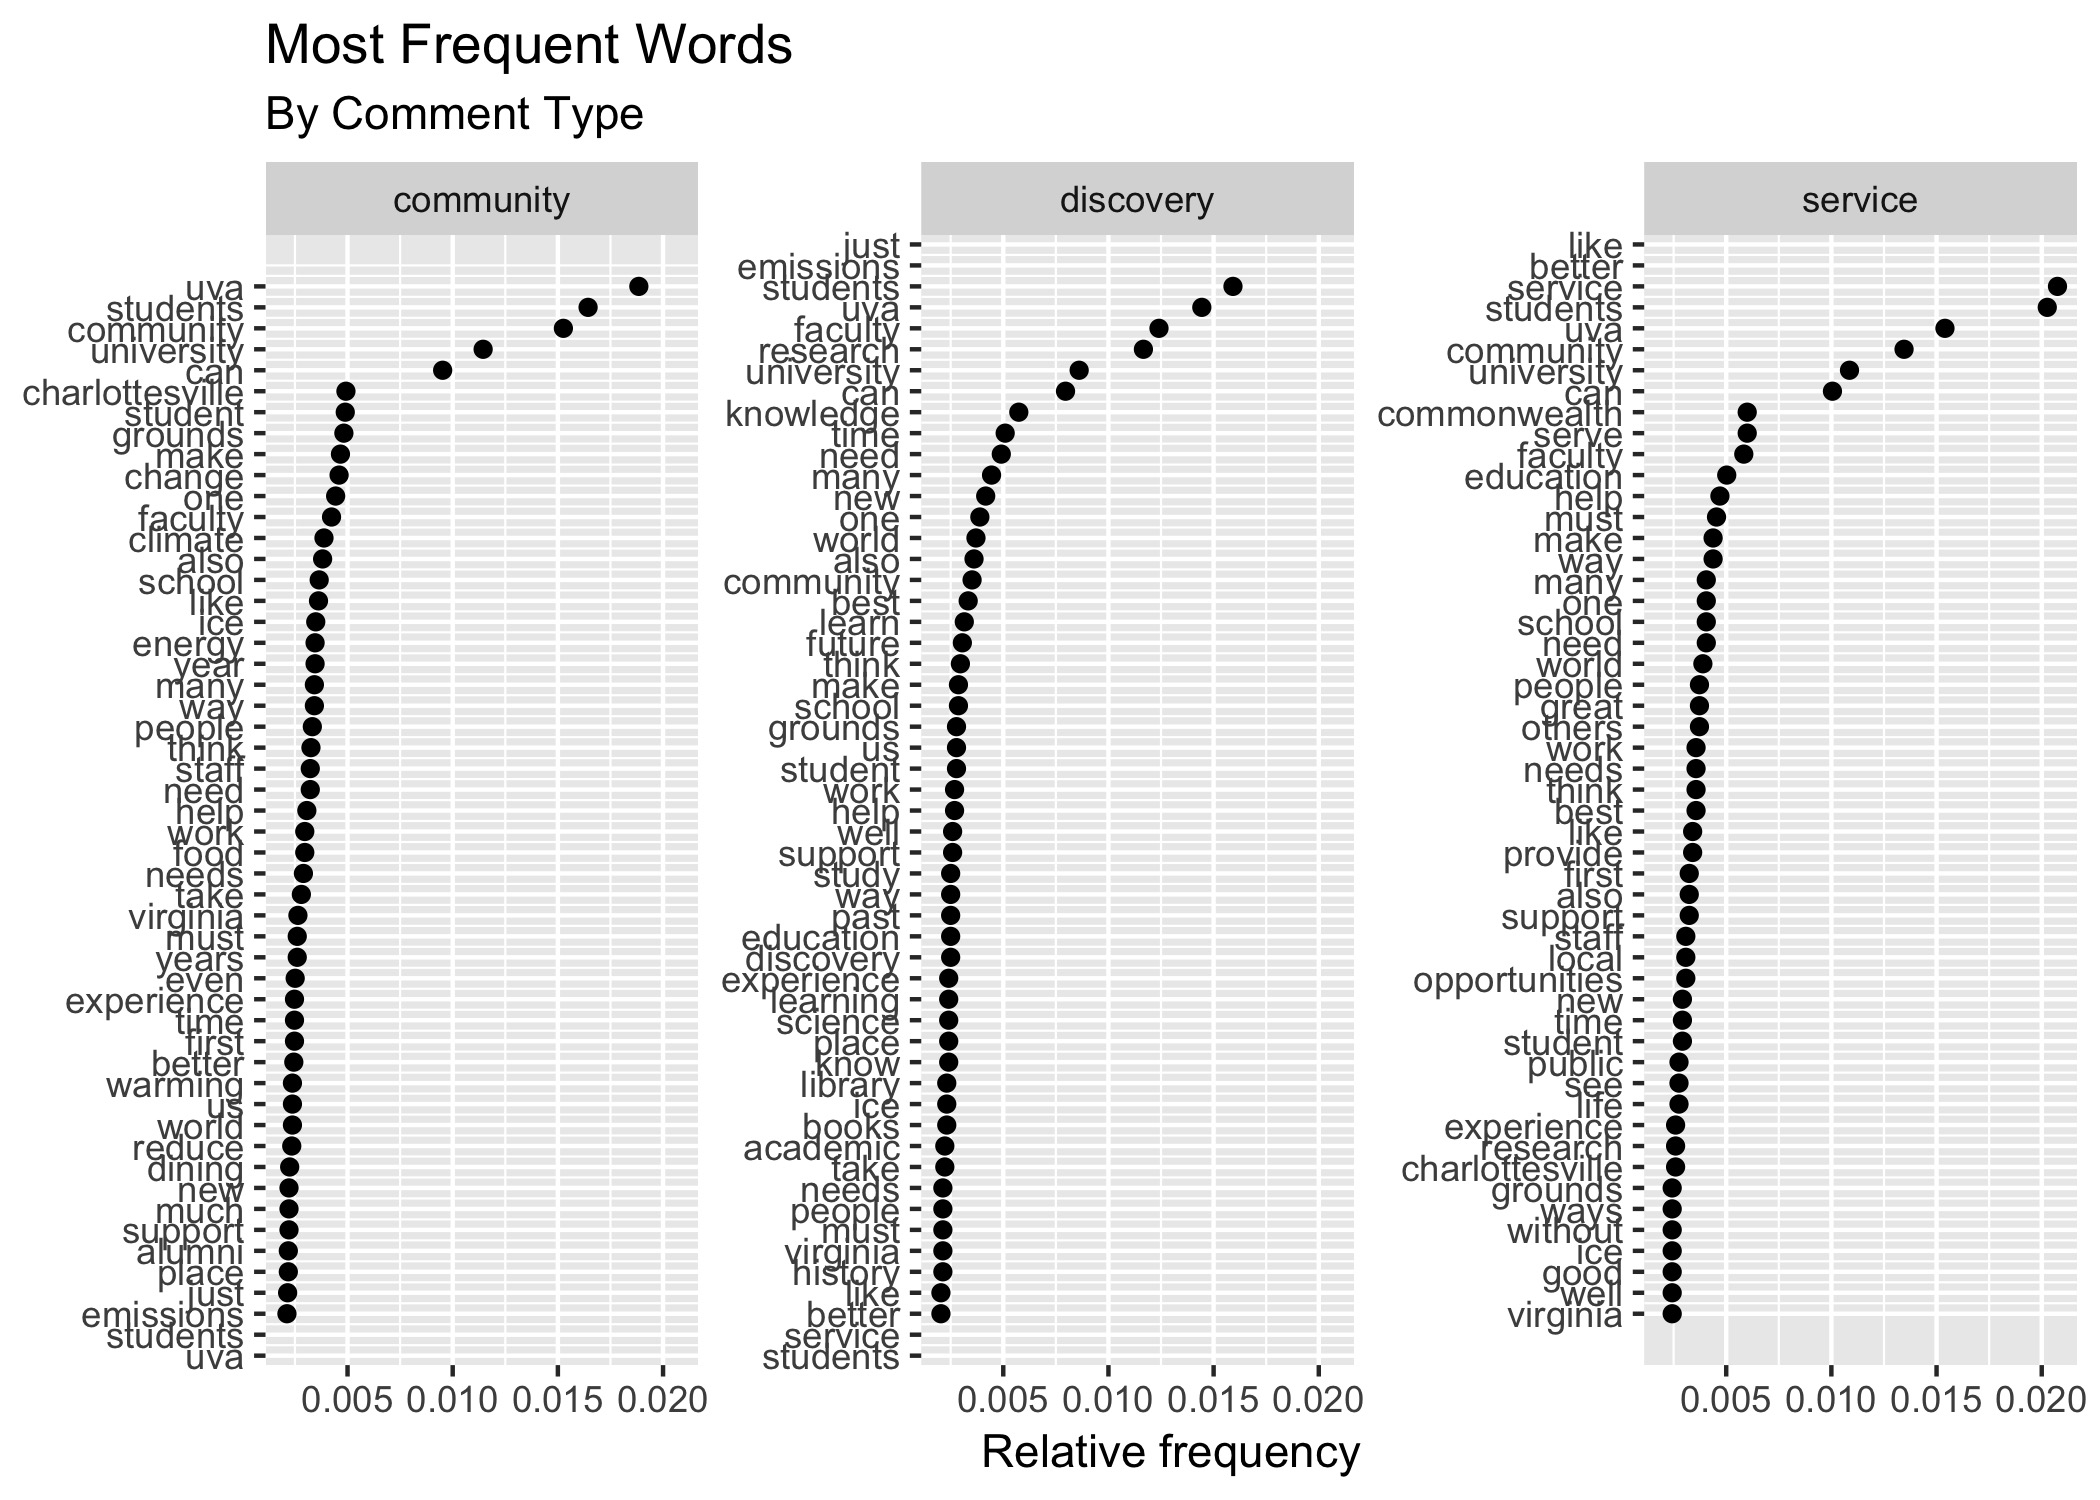 Dotplot of 50 most frequent words by comment type.